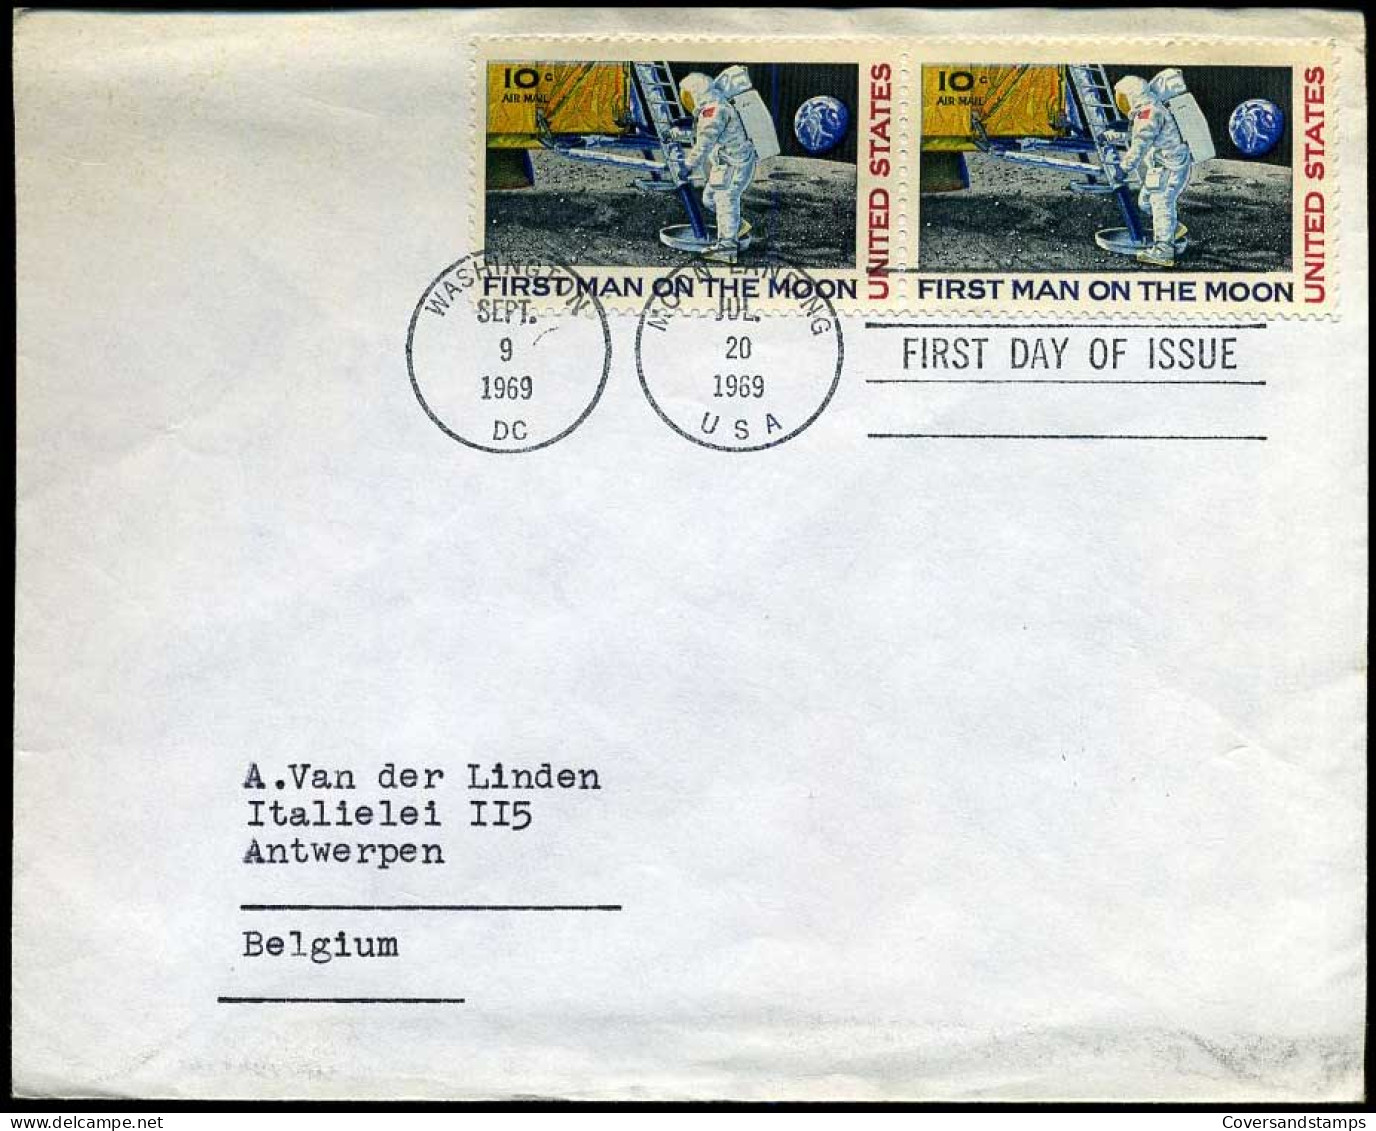 USA - FDC - First Man On The Moon - 1961-1970